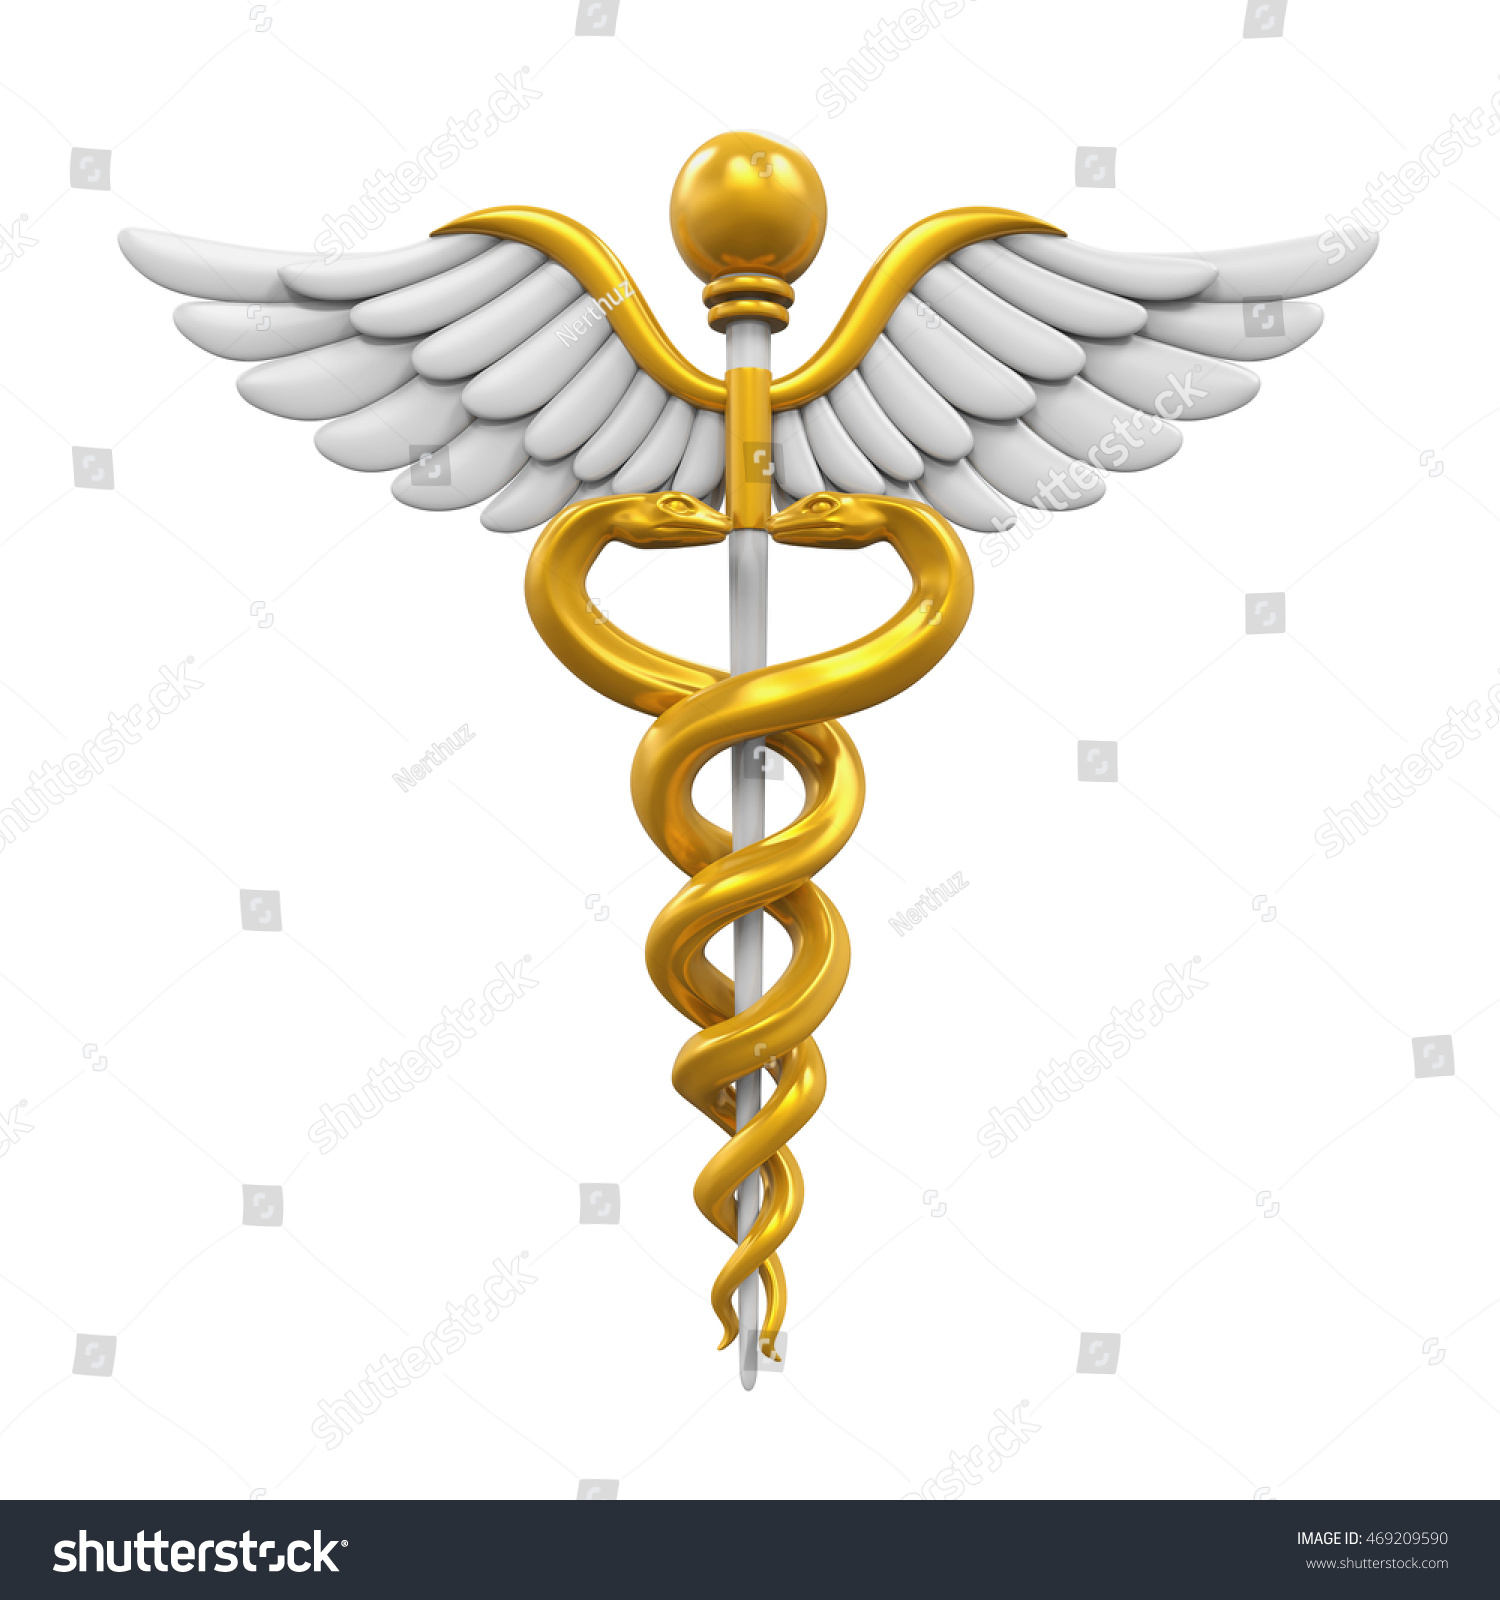 2,127 Staff Of Aesculapius Images, Stock Photos & Vectors | Shutterstock